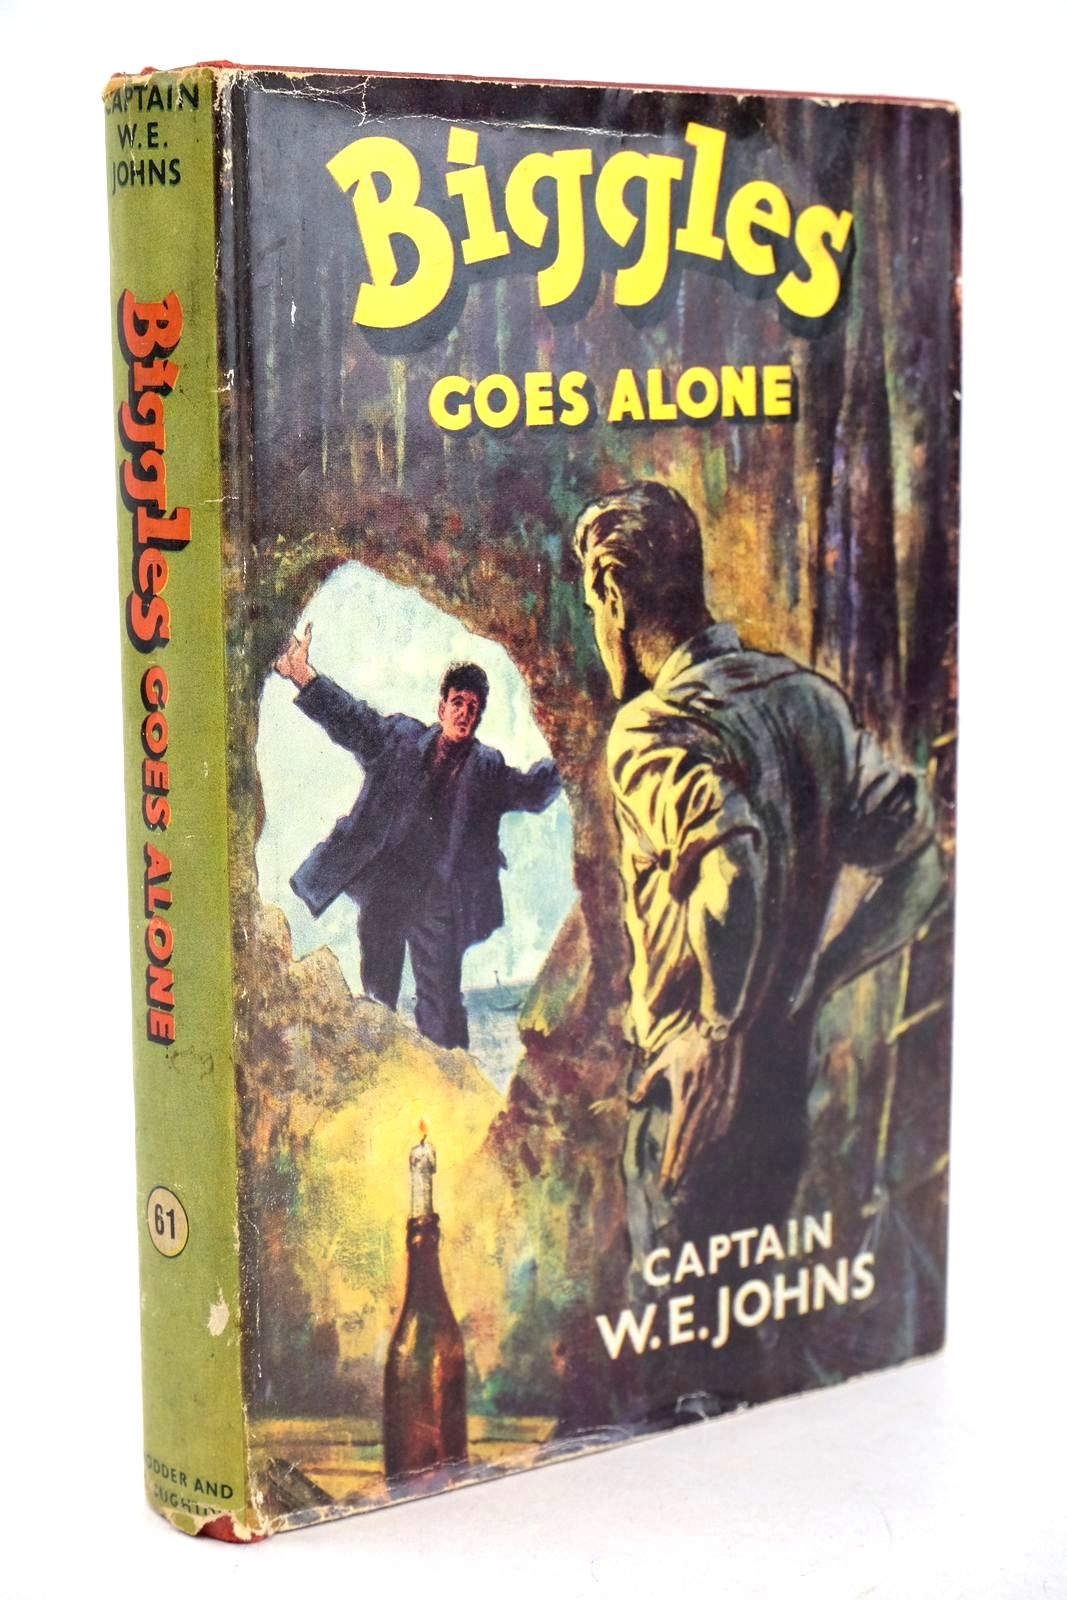 Photo of BIGGLES GOES ALONE written by Johns, W.E. illustrated by Stead,  published by Hodder &amp; Stoughton (STOCK CODE: 1326631)  for sale by Stella & Rose's Books